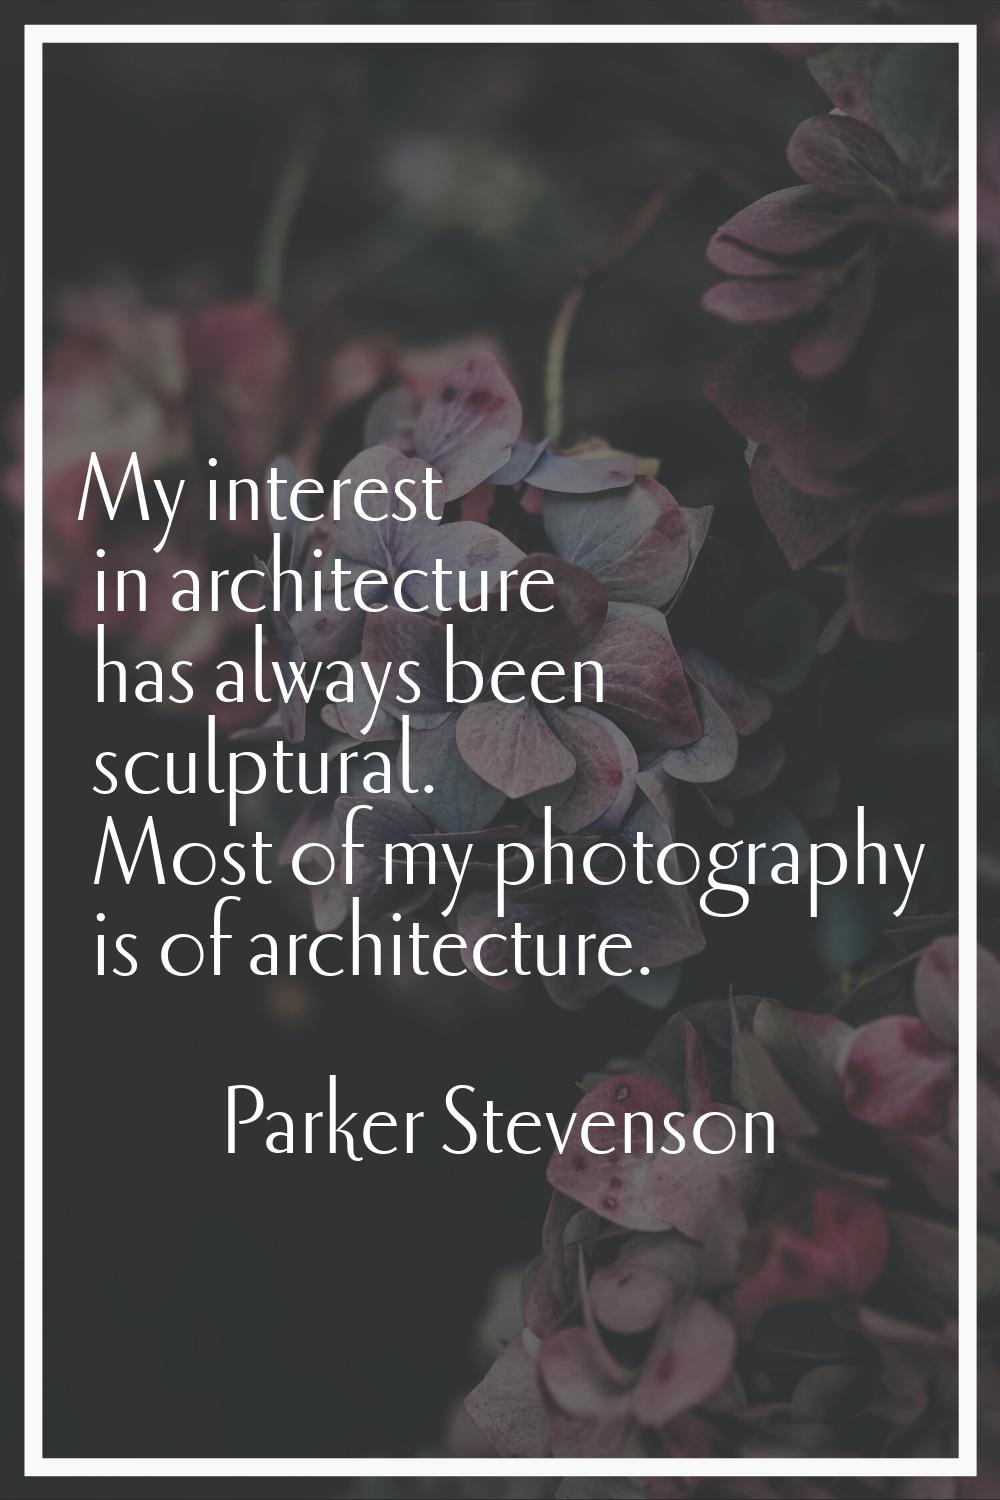 My interest in architecture has always been sculptural. Most of my photography is of architecture.